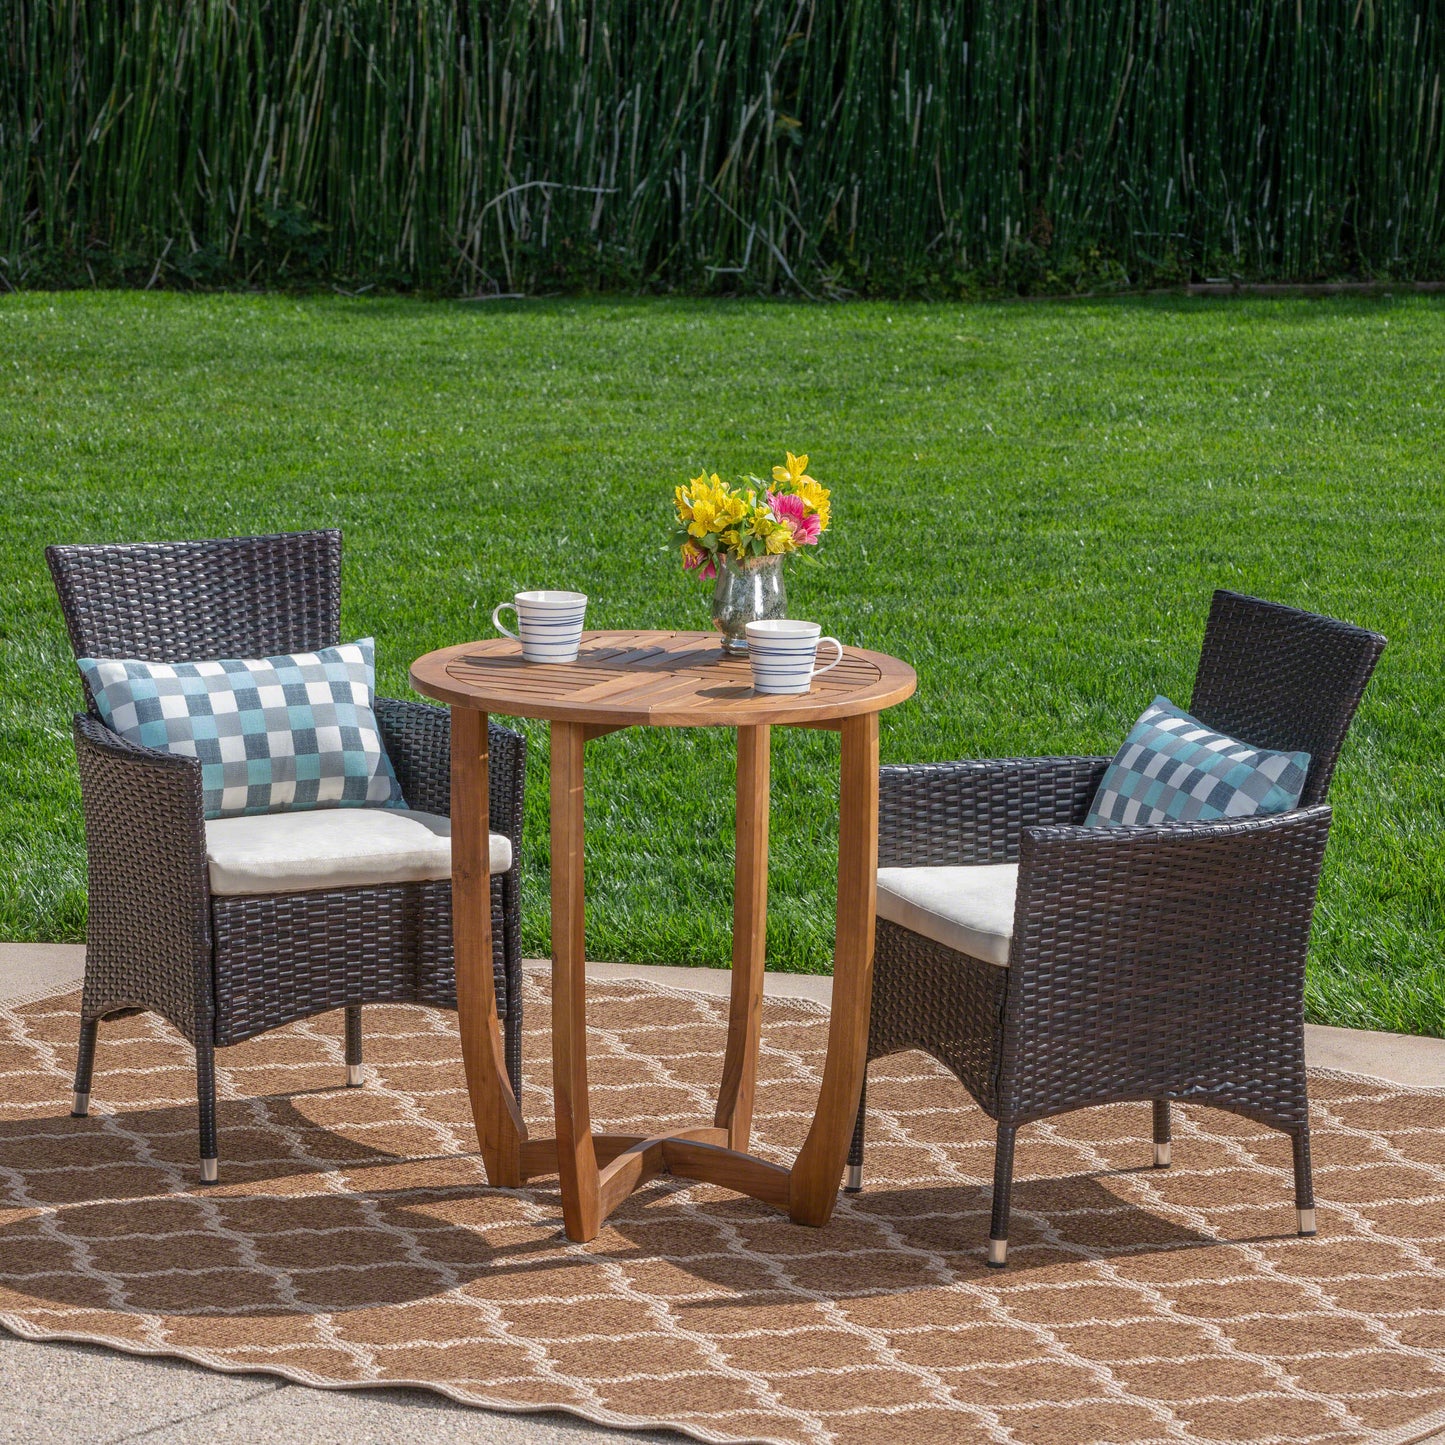 William Outdoor 3 Piece Acacia Wood/ Wicker Bistro Set with Cushions, Teak Finish and Multibrown with Beige